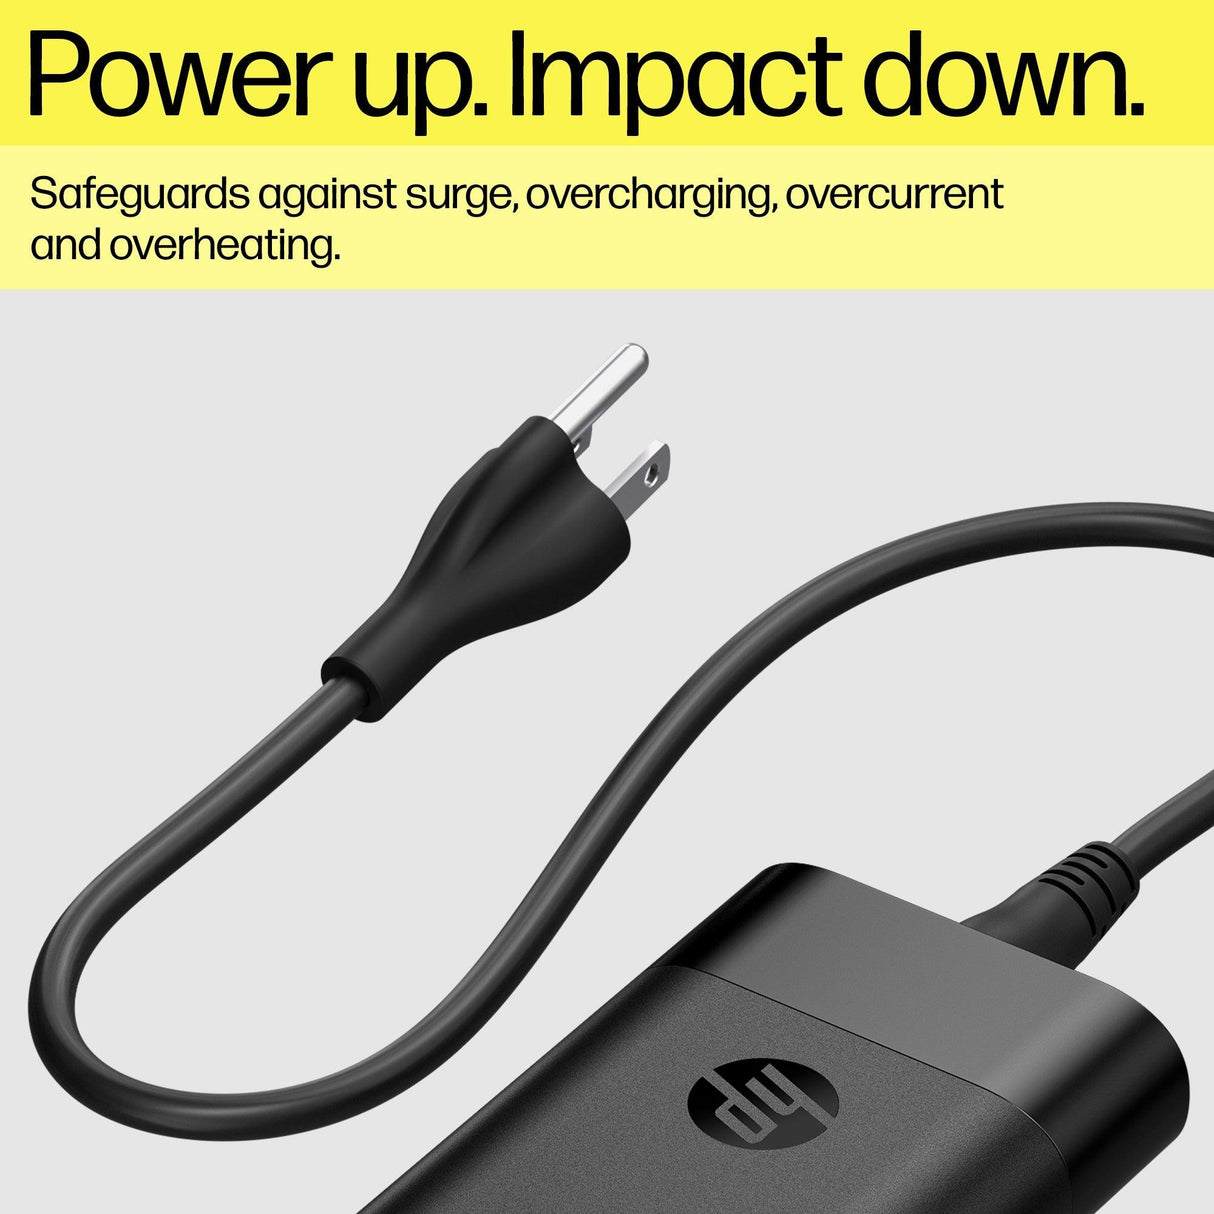 HP 110W USB-C Laptop Charger (8B3Y2AA)